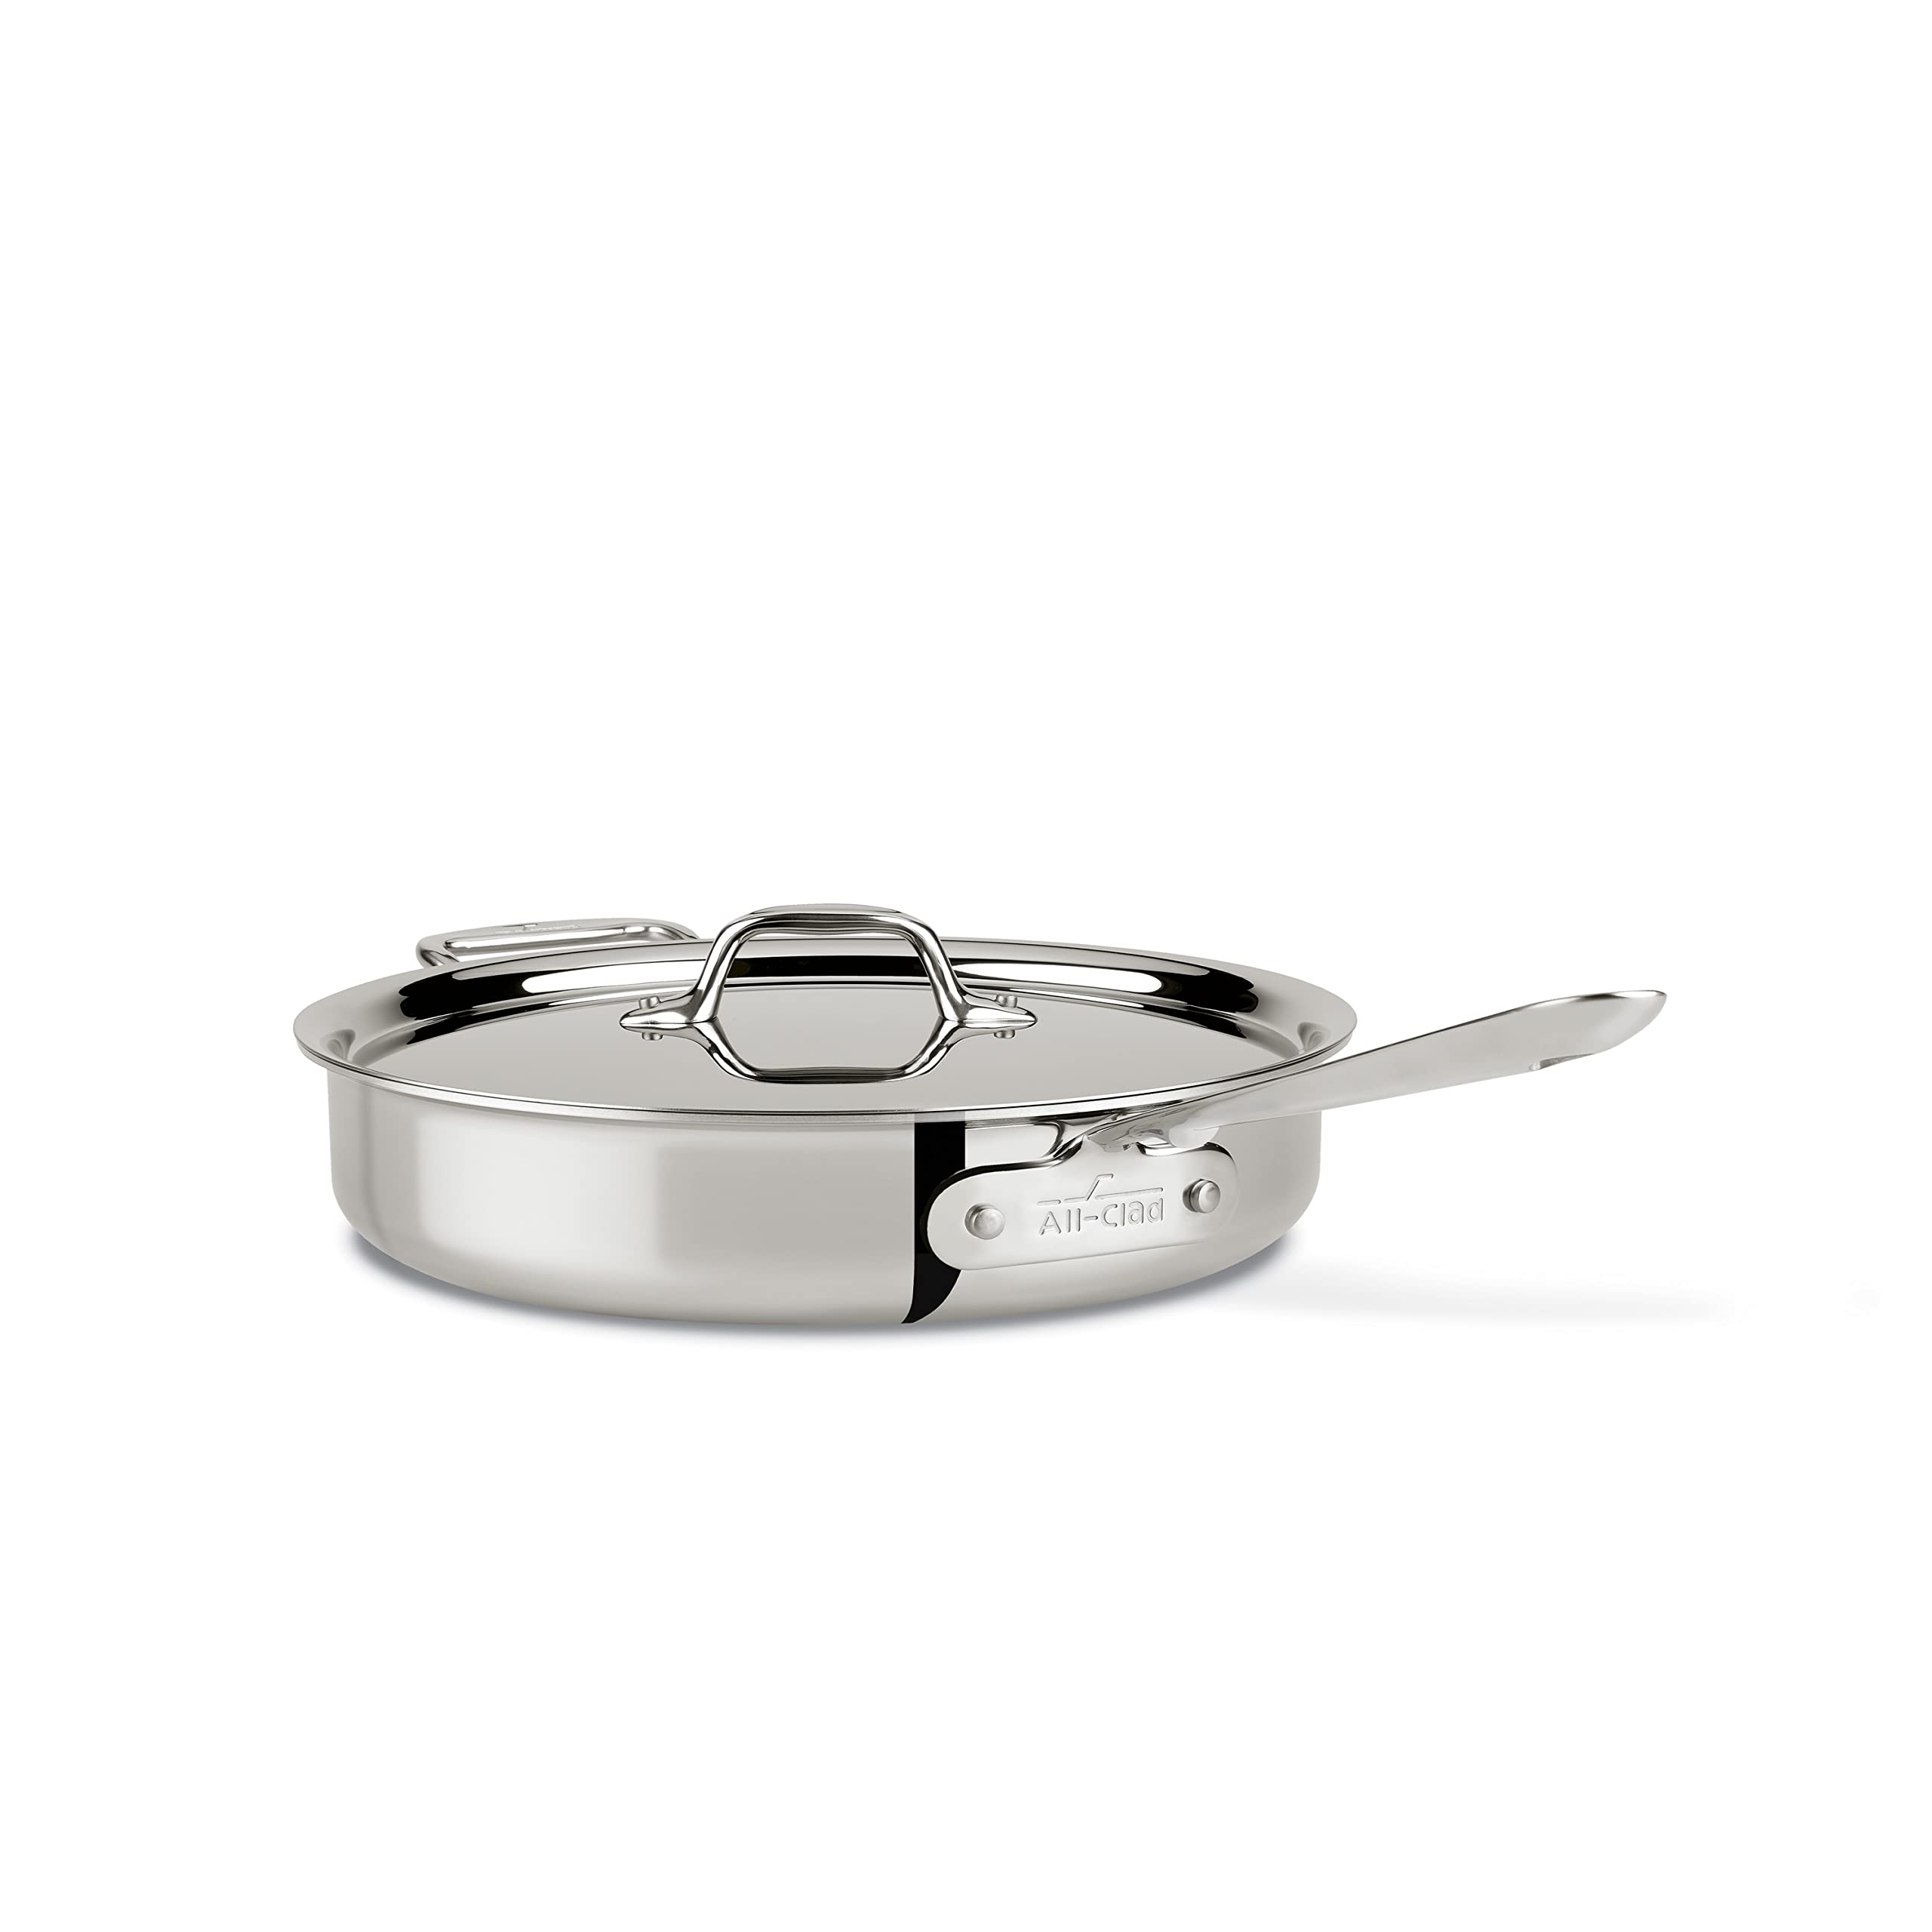 All-Clad D3 3-Ply Stainless Steel Sauté Pan with Lid 3 Quart Induction Oven Broil Safe 600F Pots and Pans, Cookware